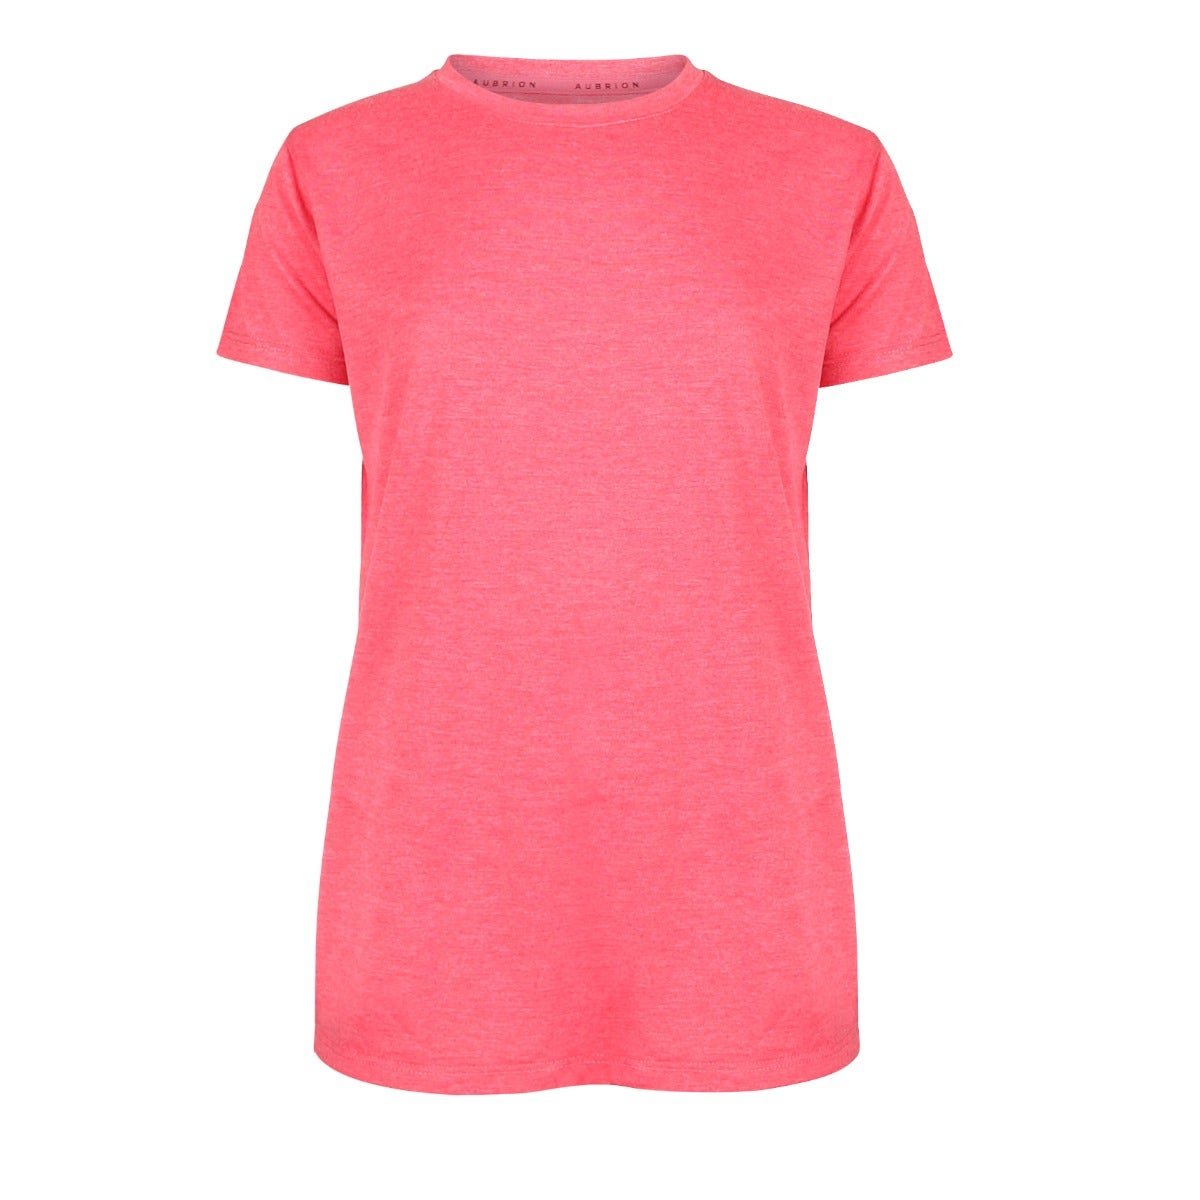 Aubrion SS24 Energise Tech T-Shirt - Young Rider - Coral - 7/8 Years